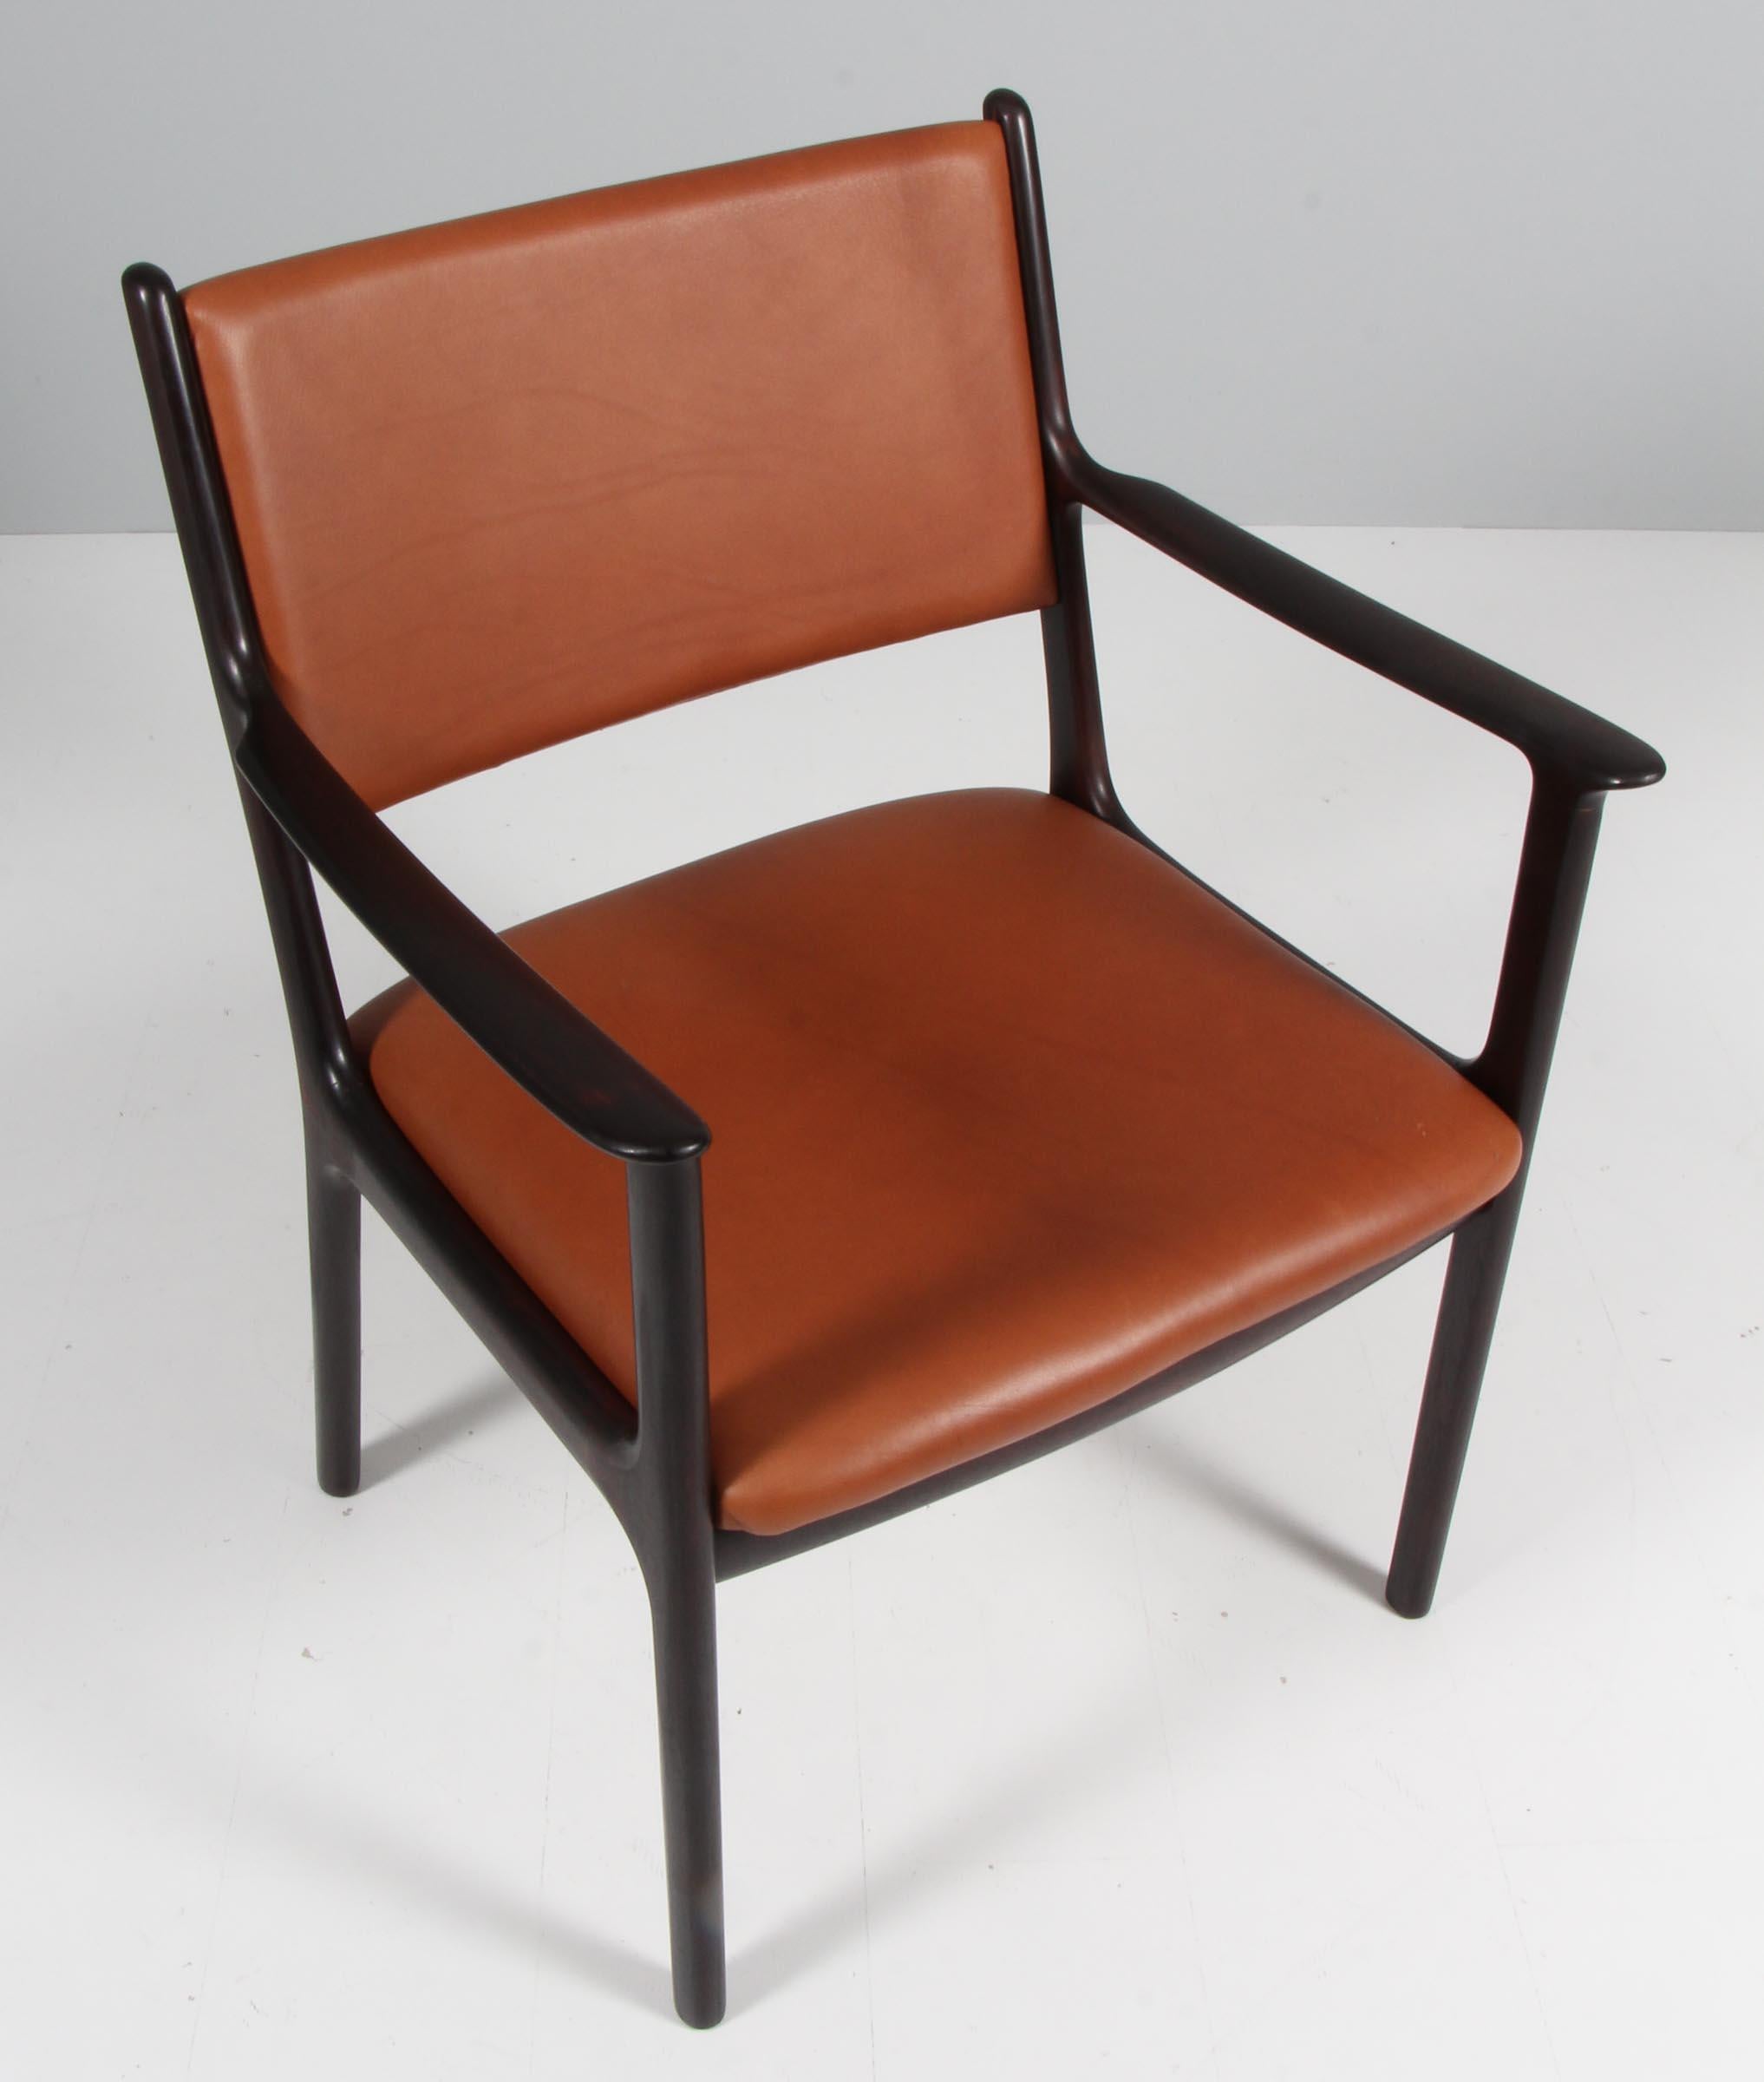 Ole Wanscher armchair new upholstered with tan pure aniline leather.

Made of solid rosewood.

Model PJ 412, made by Poul Jeppesen.

